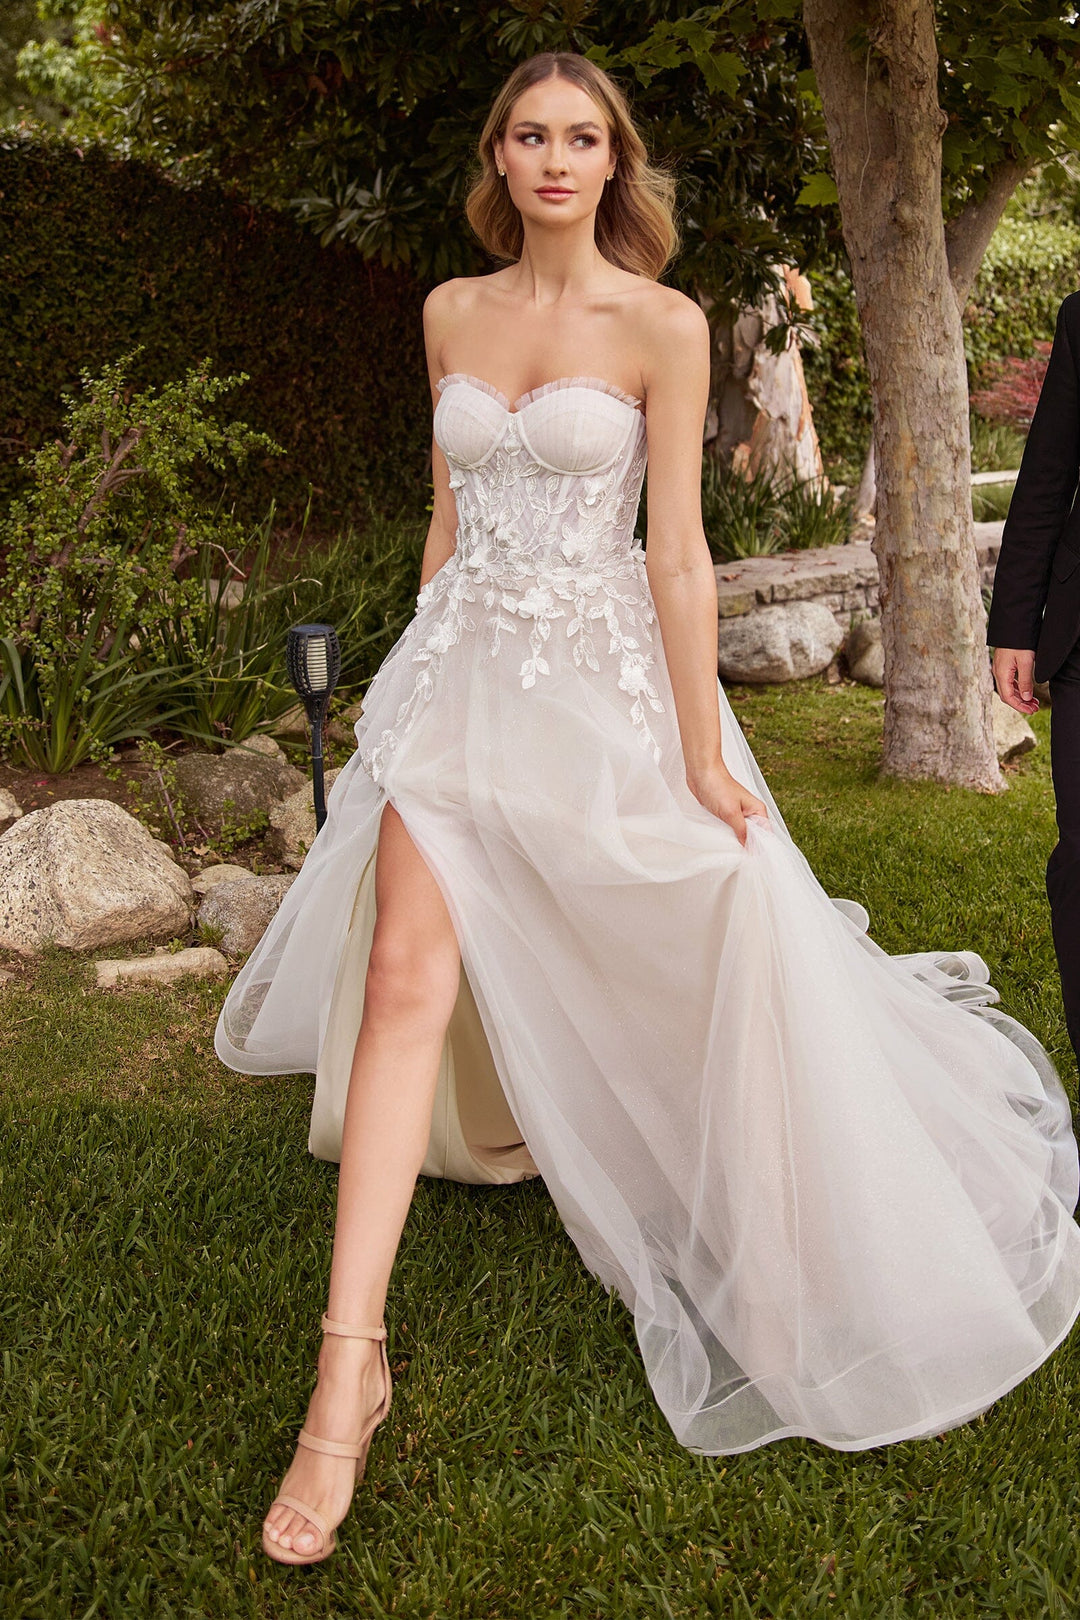 Strapless Bridal Gown with Gloves by Ladivine CD859W